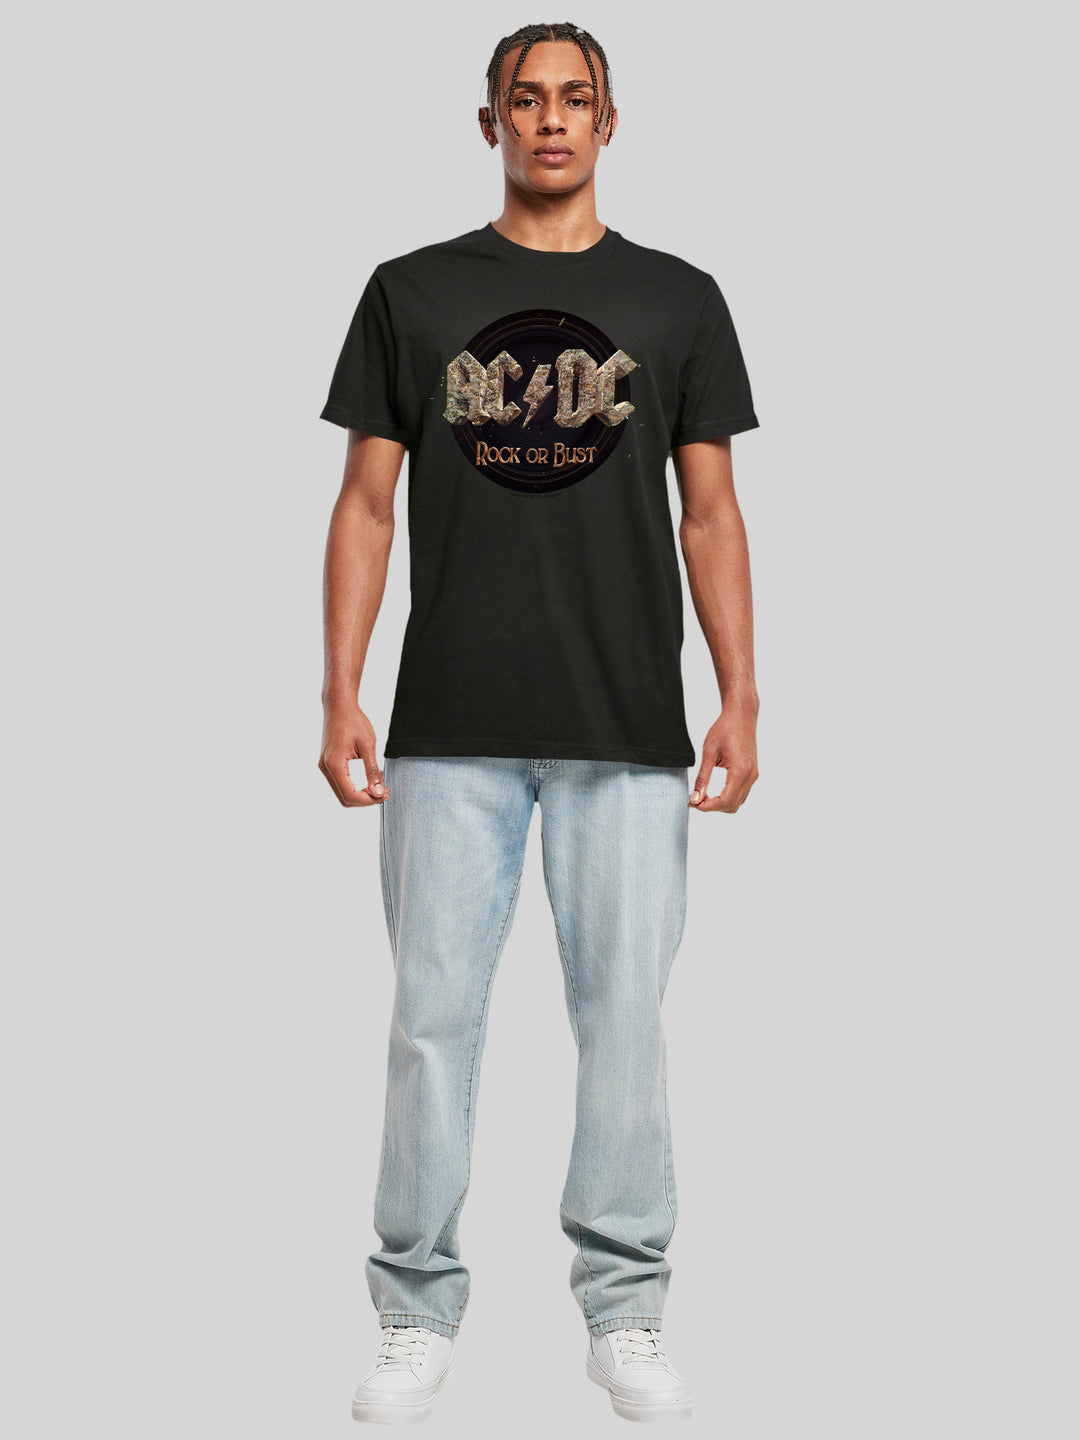 AC/DC Rock or Bust Round Neck T-Shirt - Embrace Your Rock Spirit with Comfort & Style